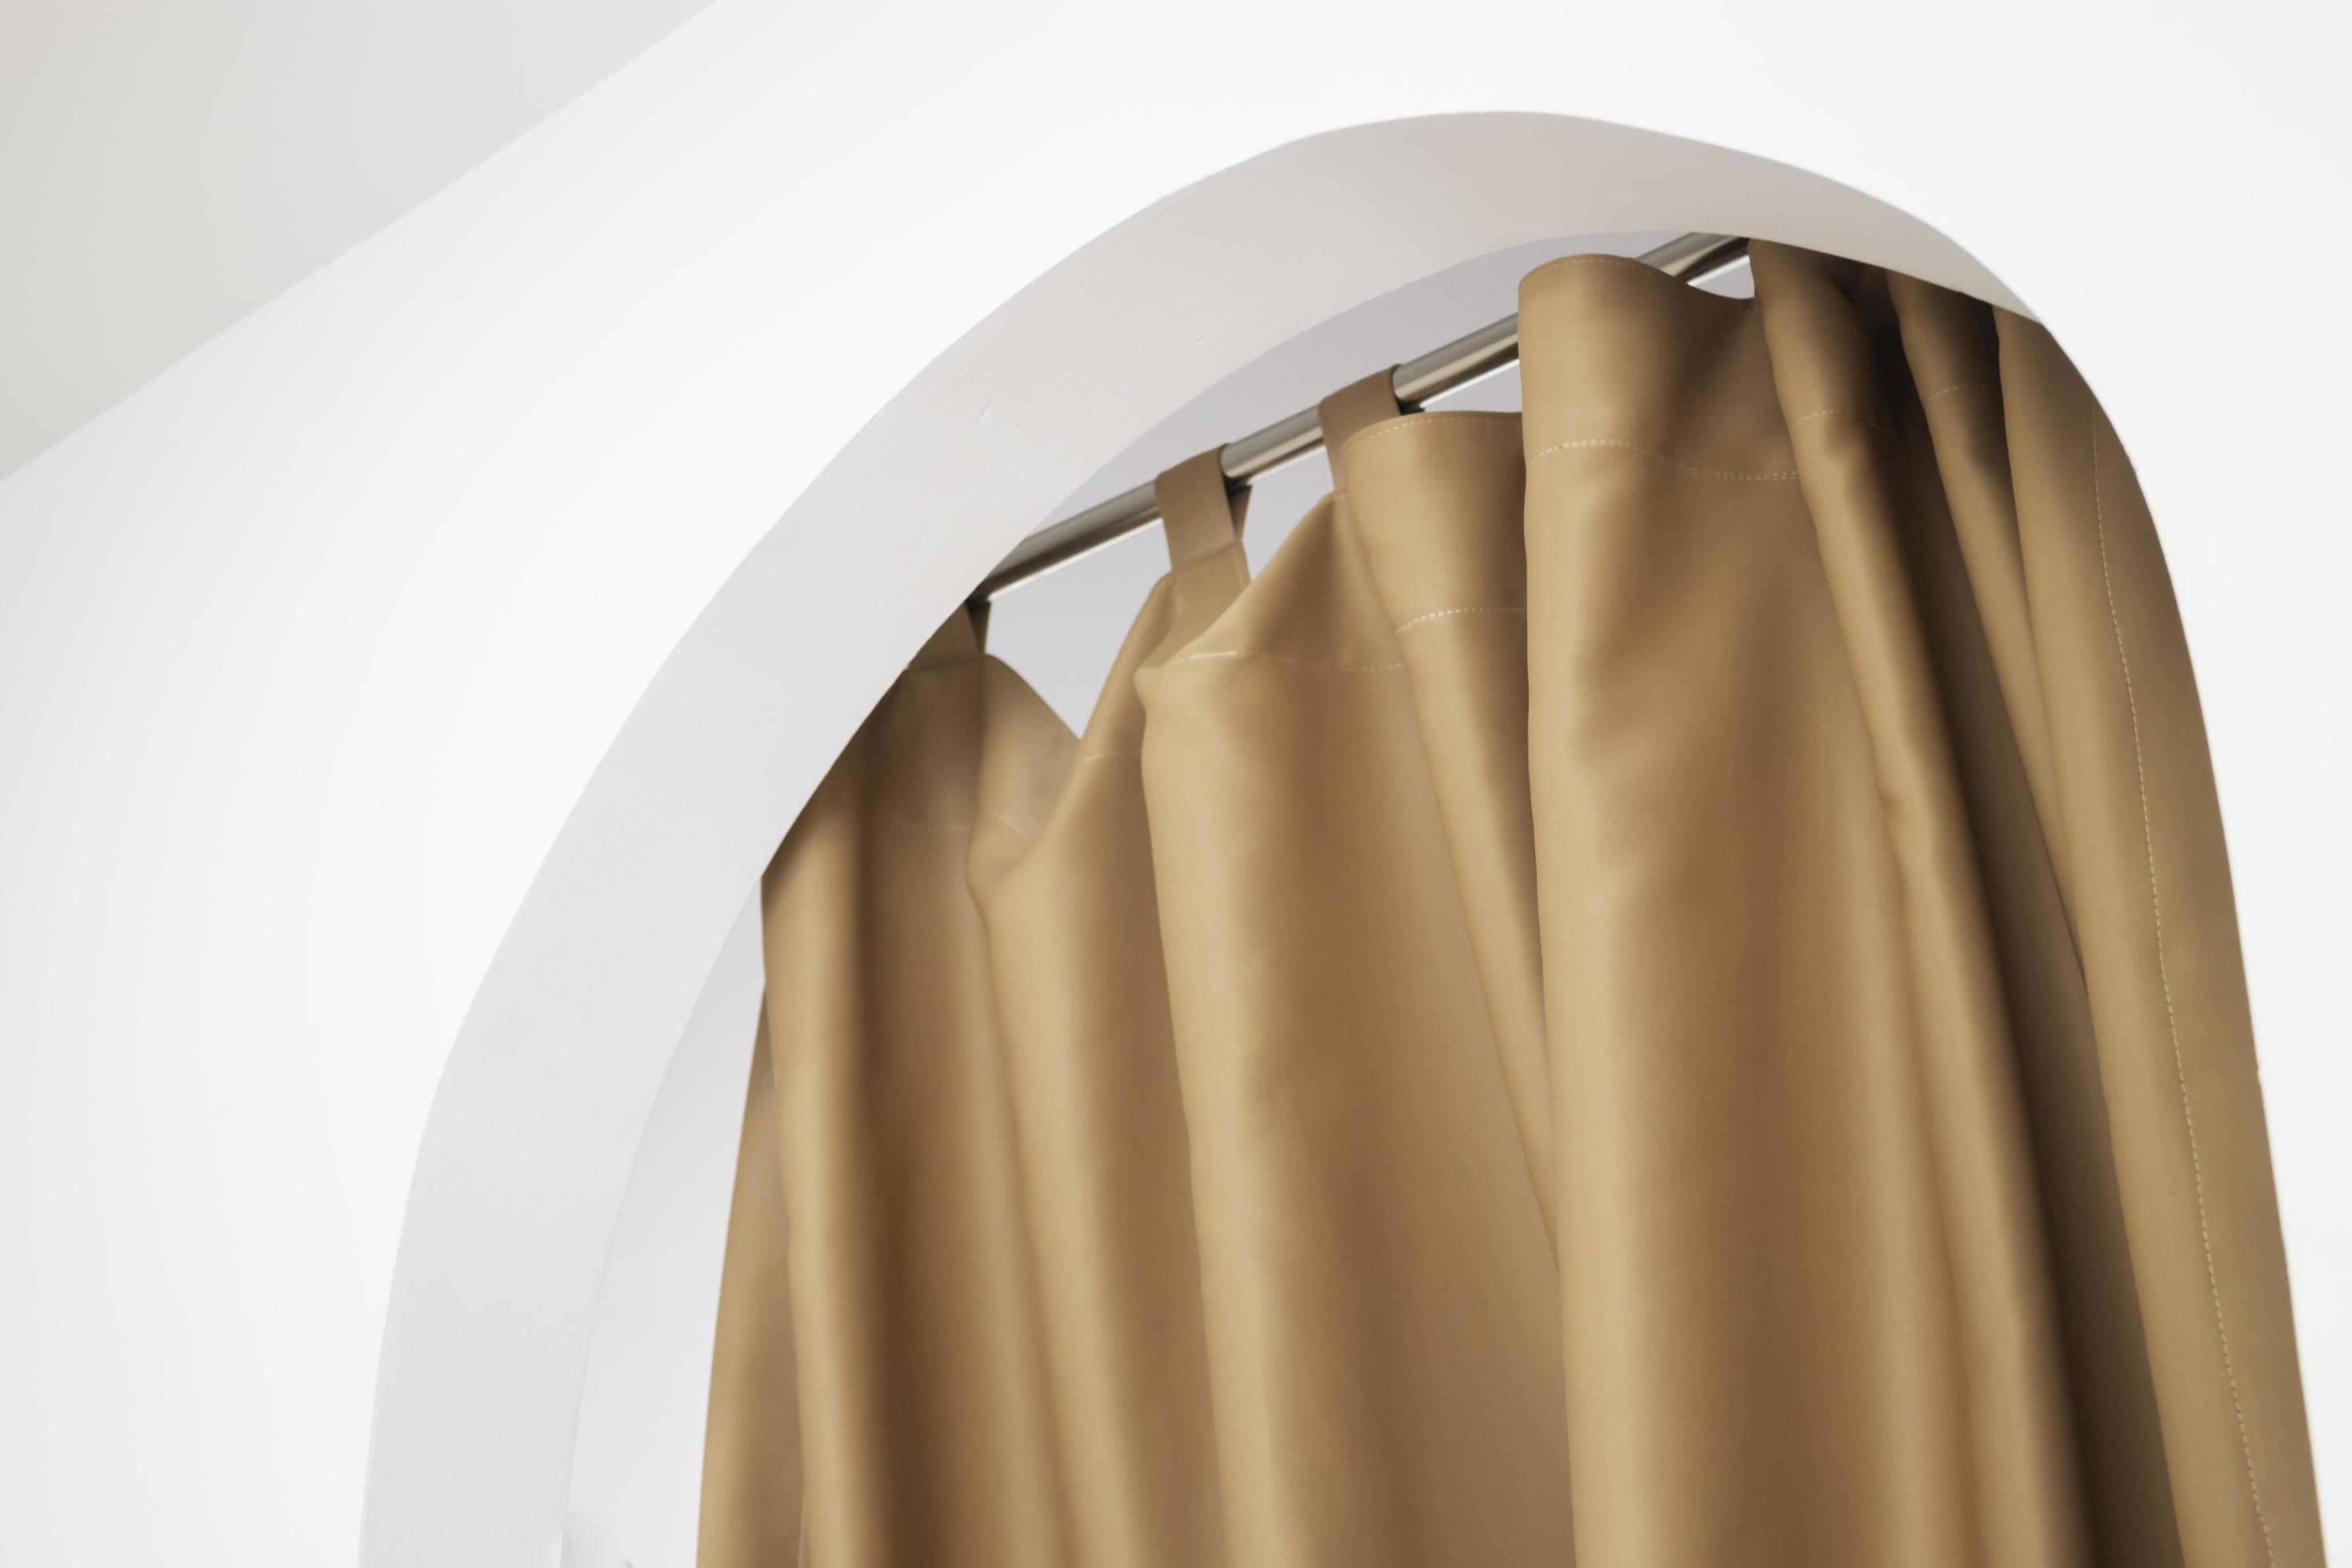 Hanging Up Curtain Using Pleat Hooks Stock Photo - Download Image Now -  Curtain, Architectural Cornice, Repairing - iStock